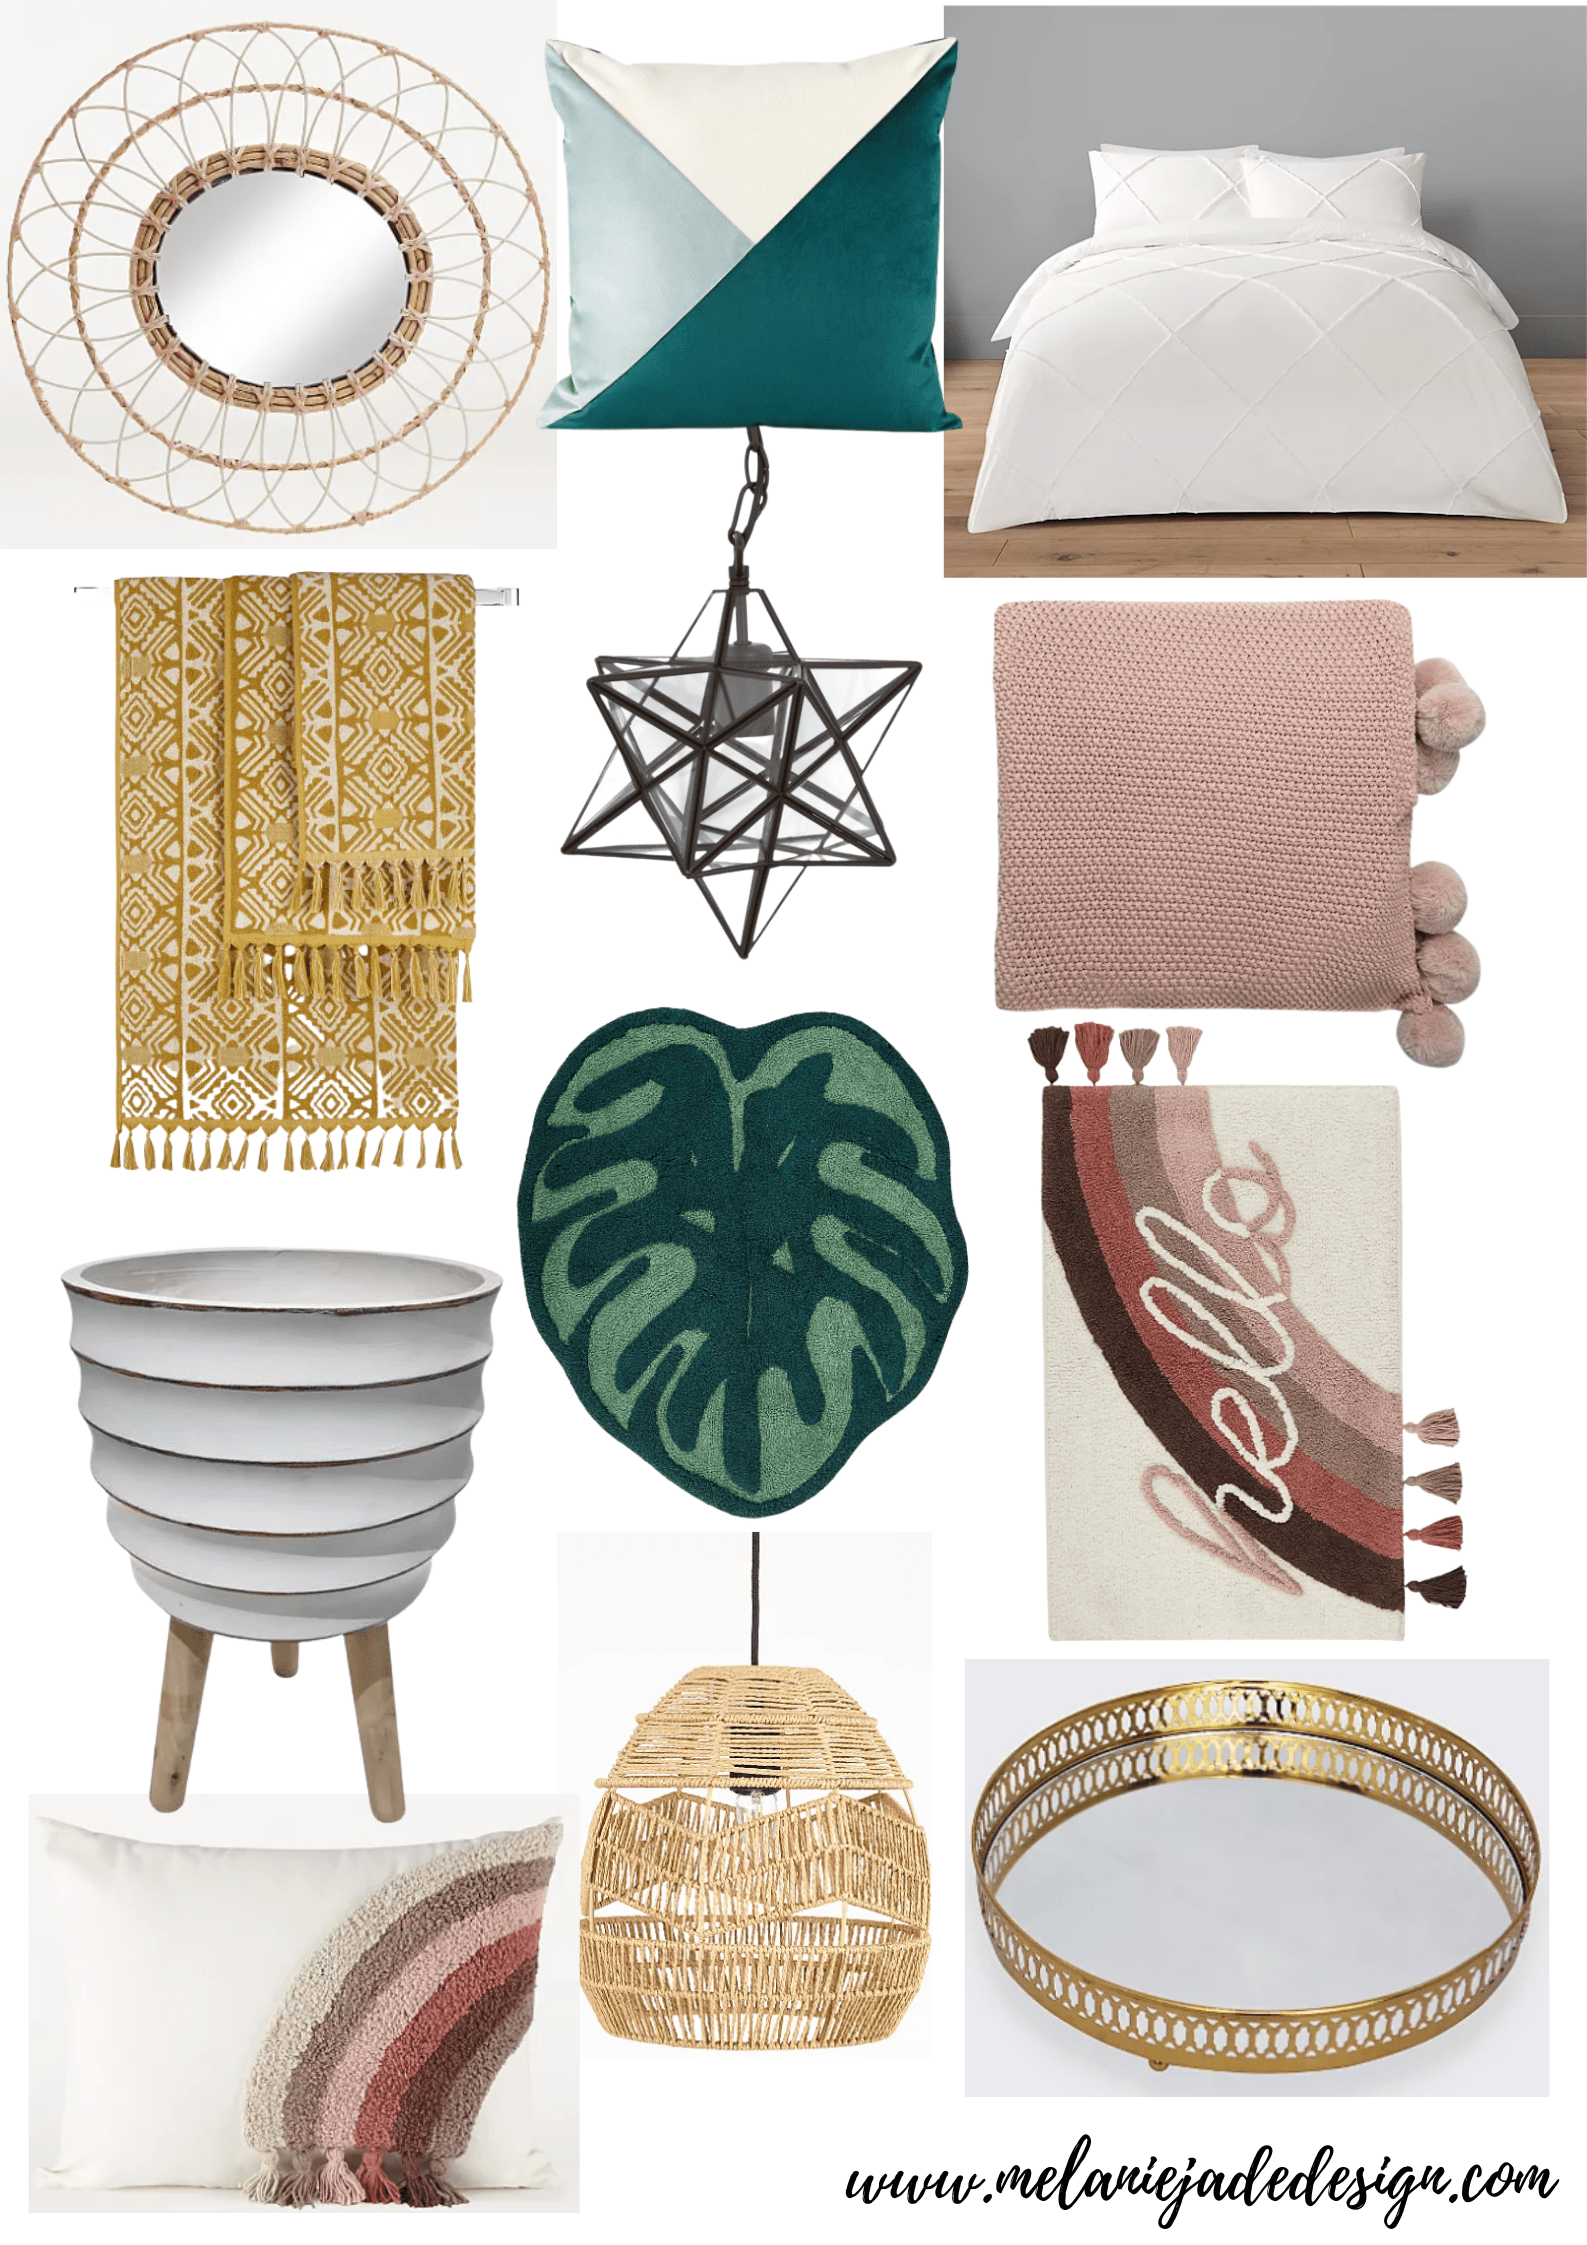 Homewares for Under £50 from my Favourite Online Stores